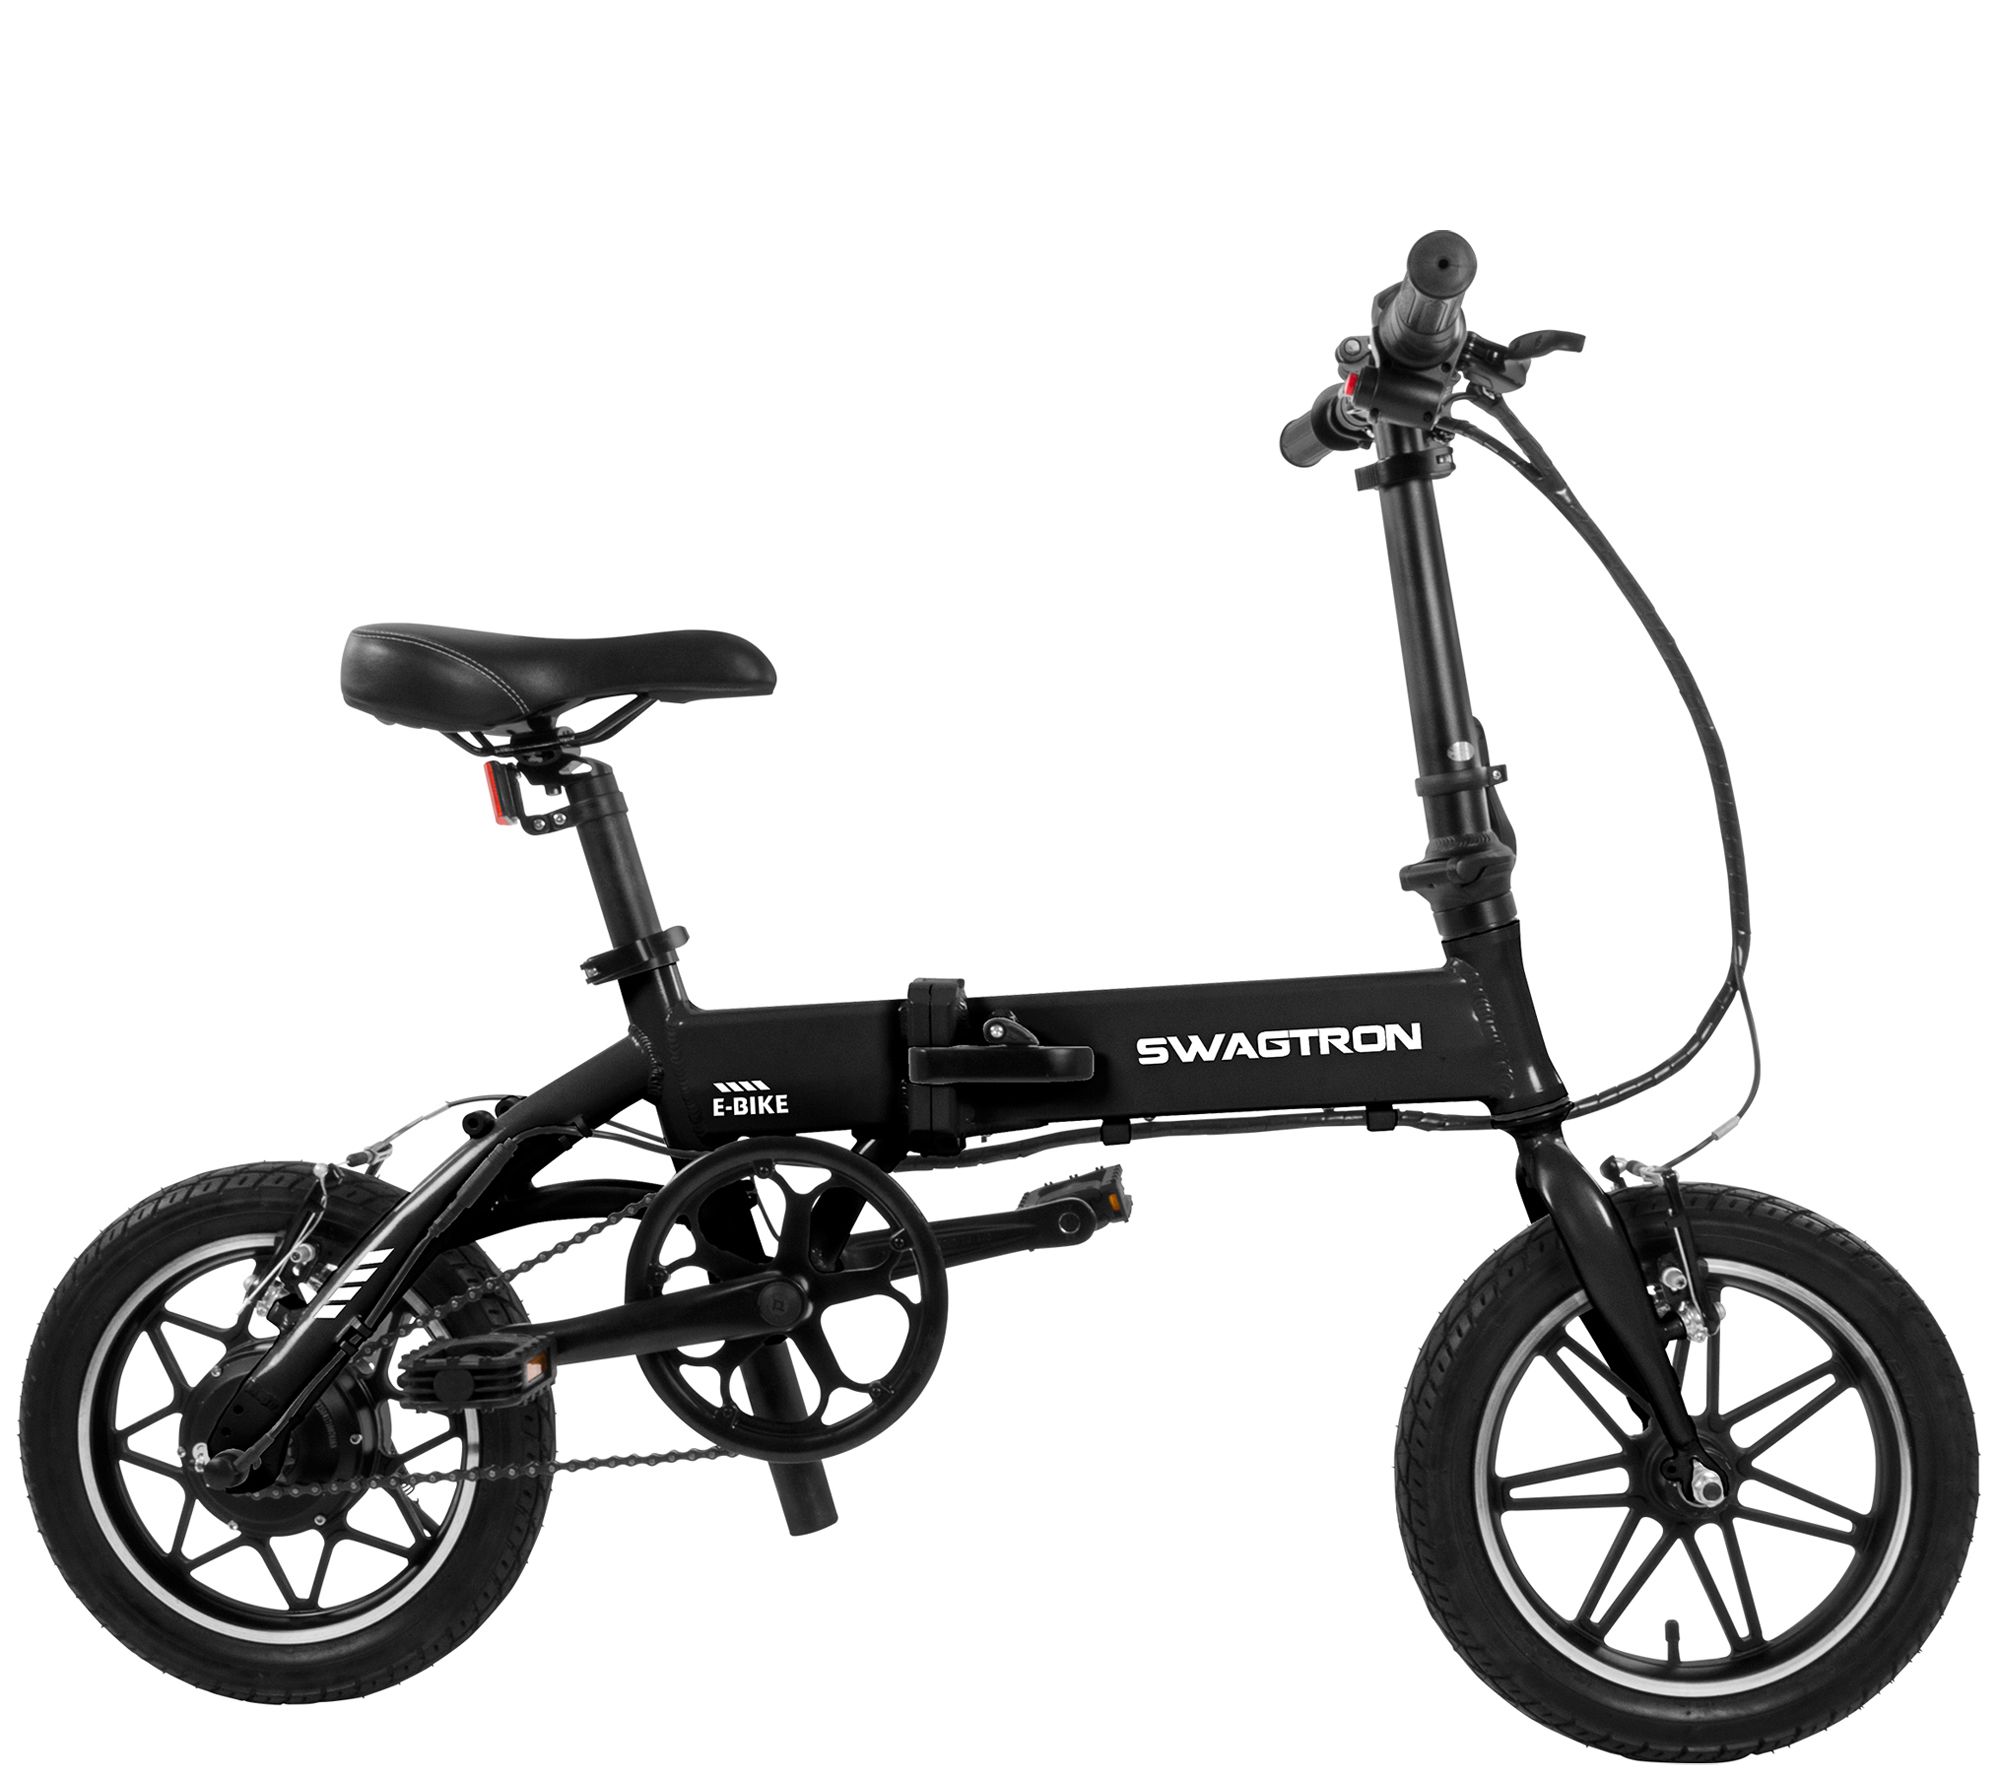 swagtron swagcycle bicycles